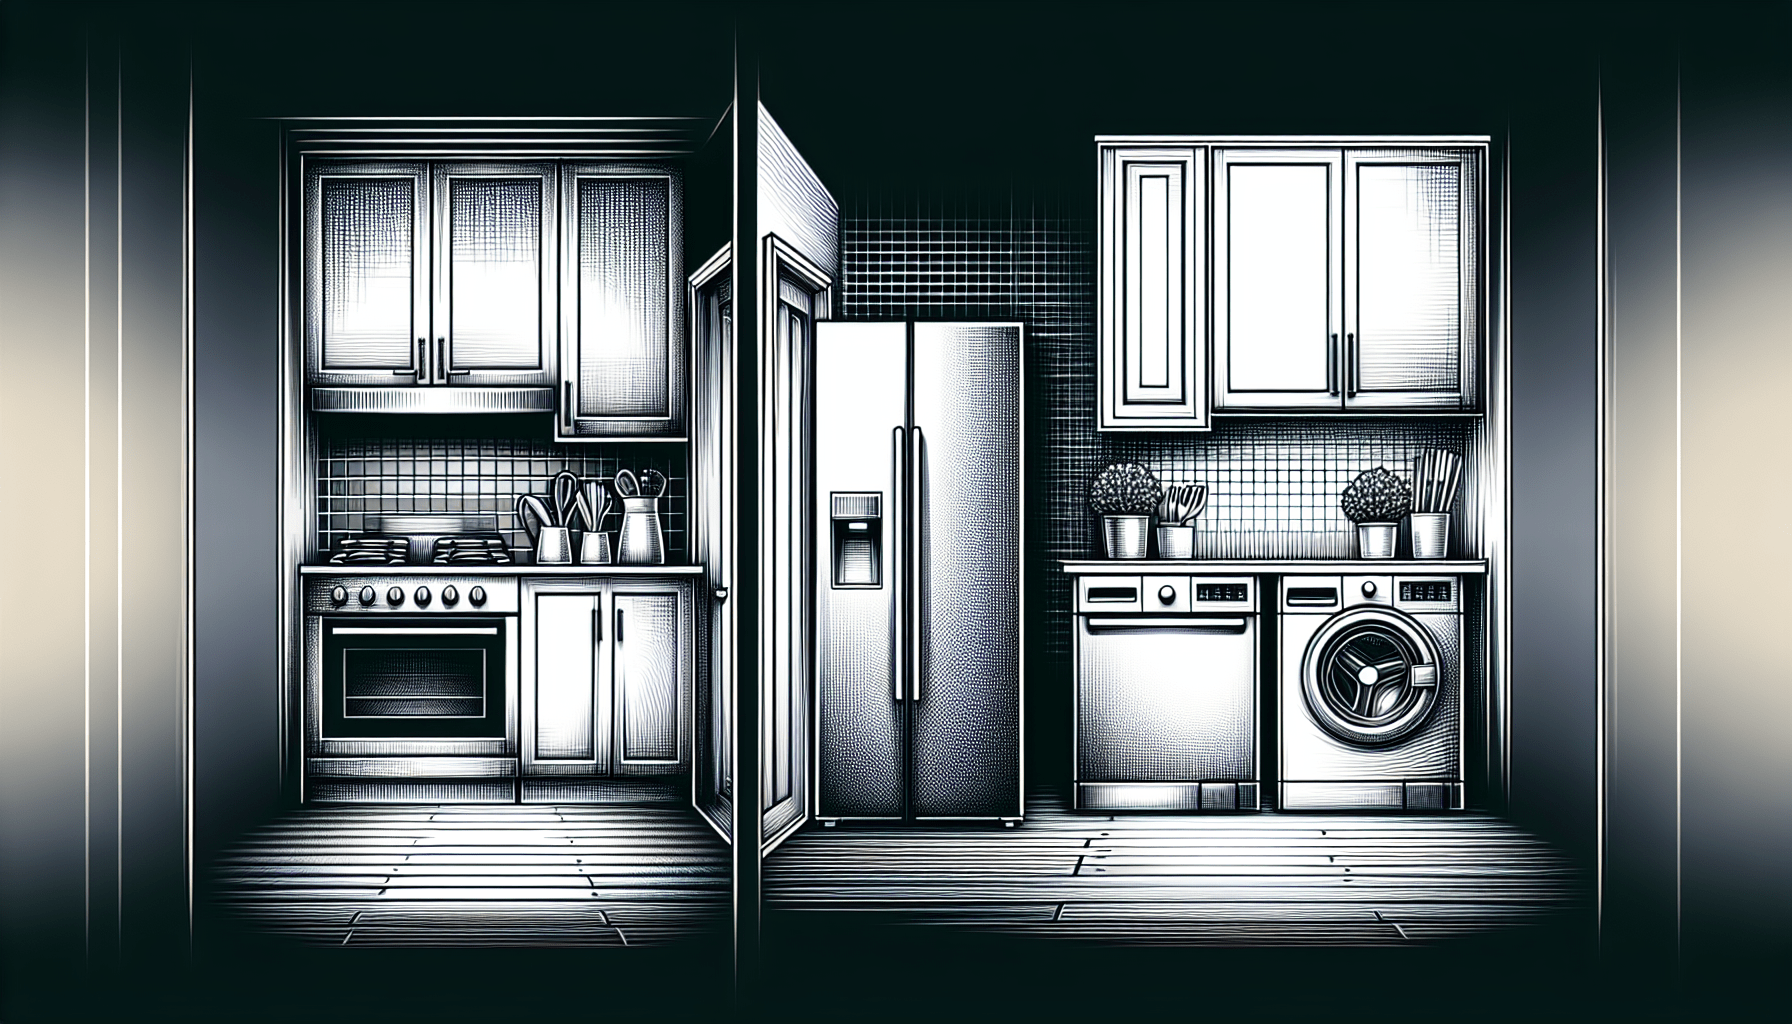 Can You Put Appliances Next To Each Other?